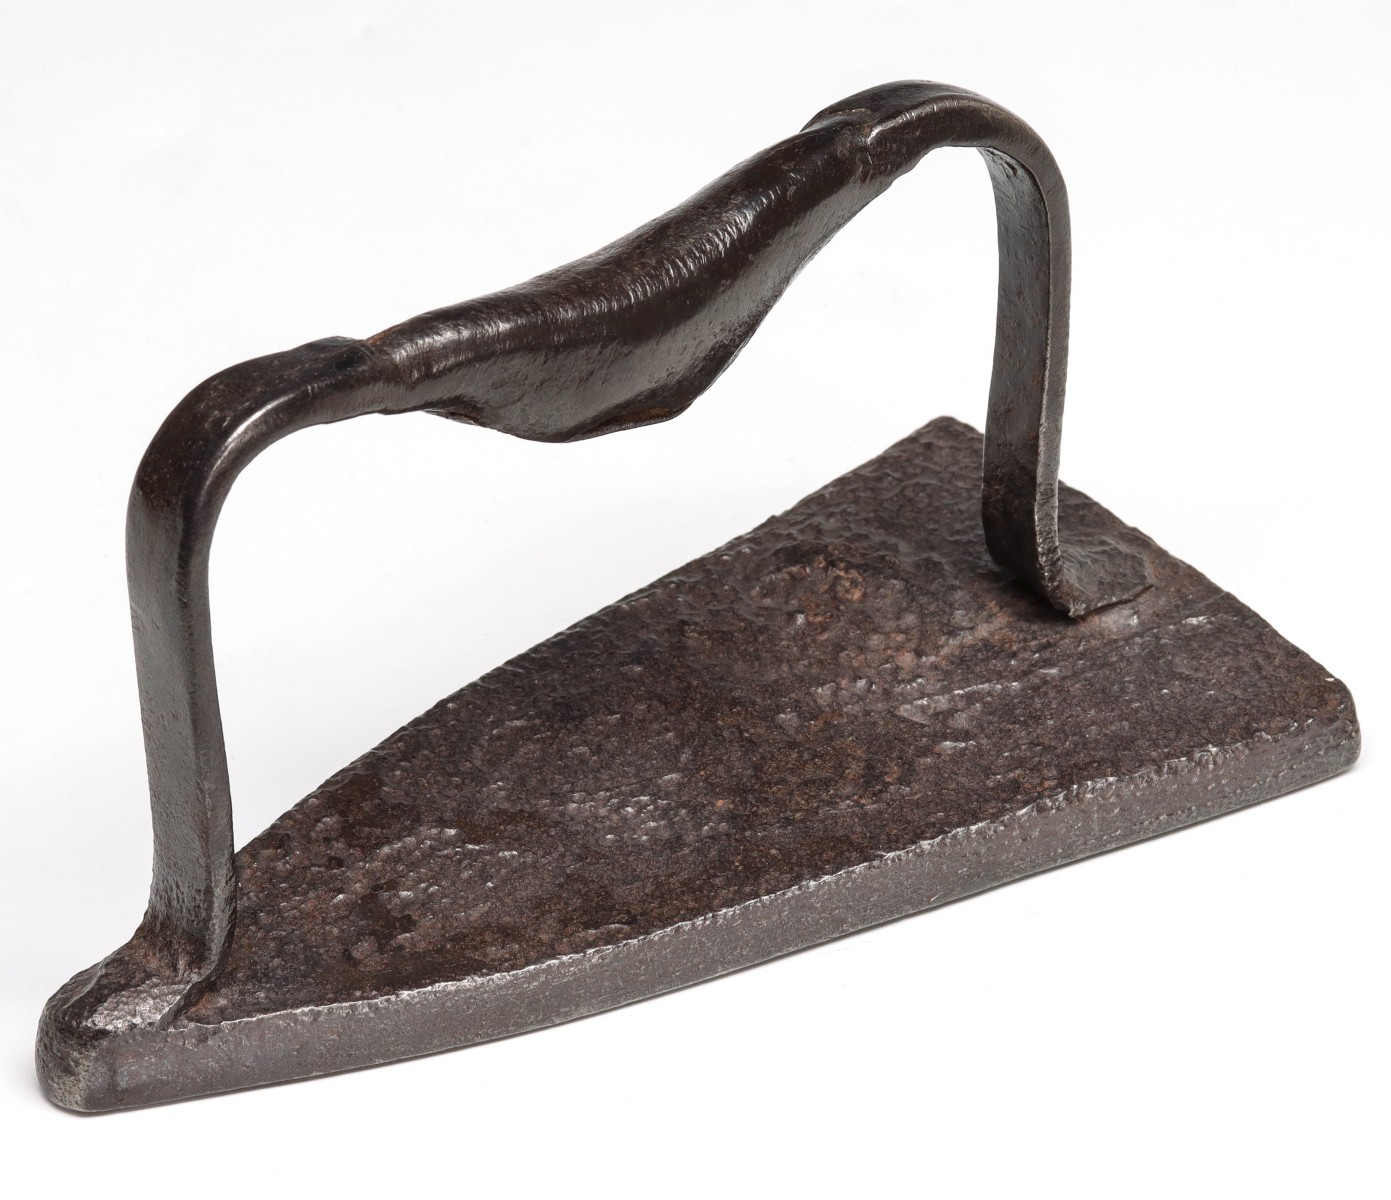 AN 18TH/ 19TH CENTURY PRESSING IRON WITH 'BELL' HANDLE